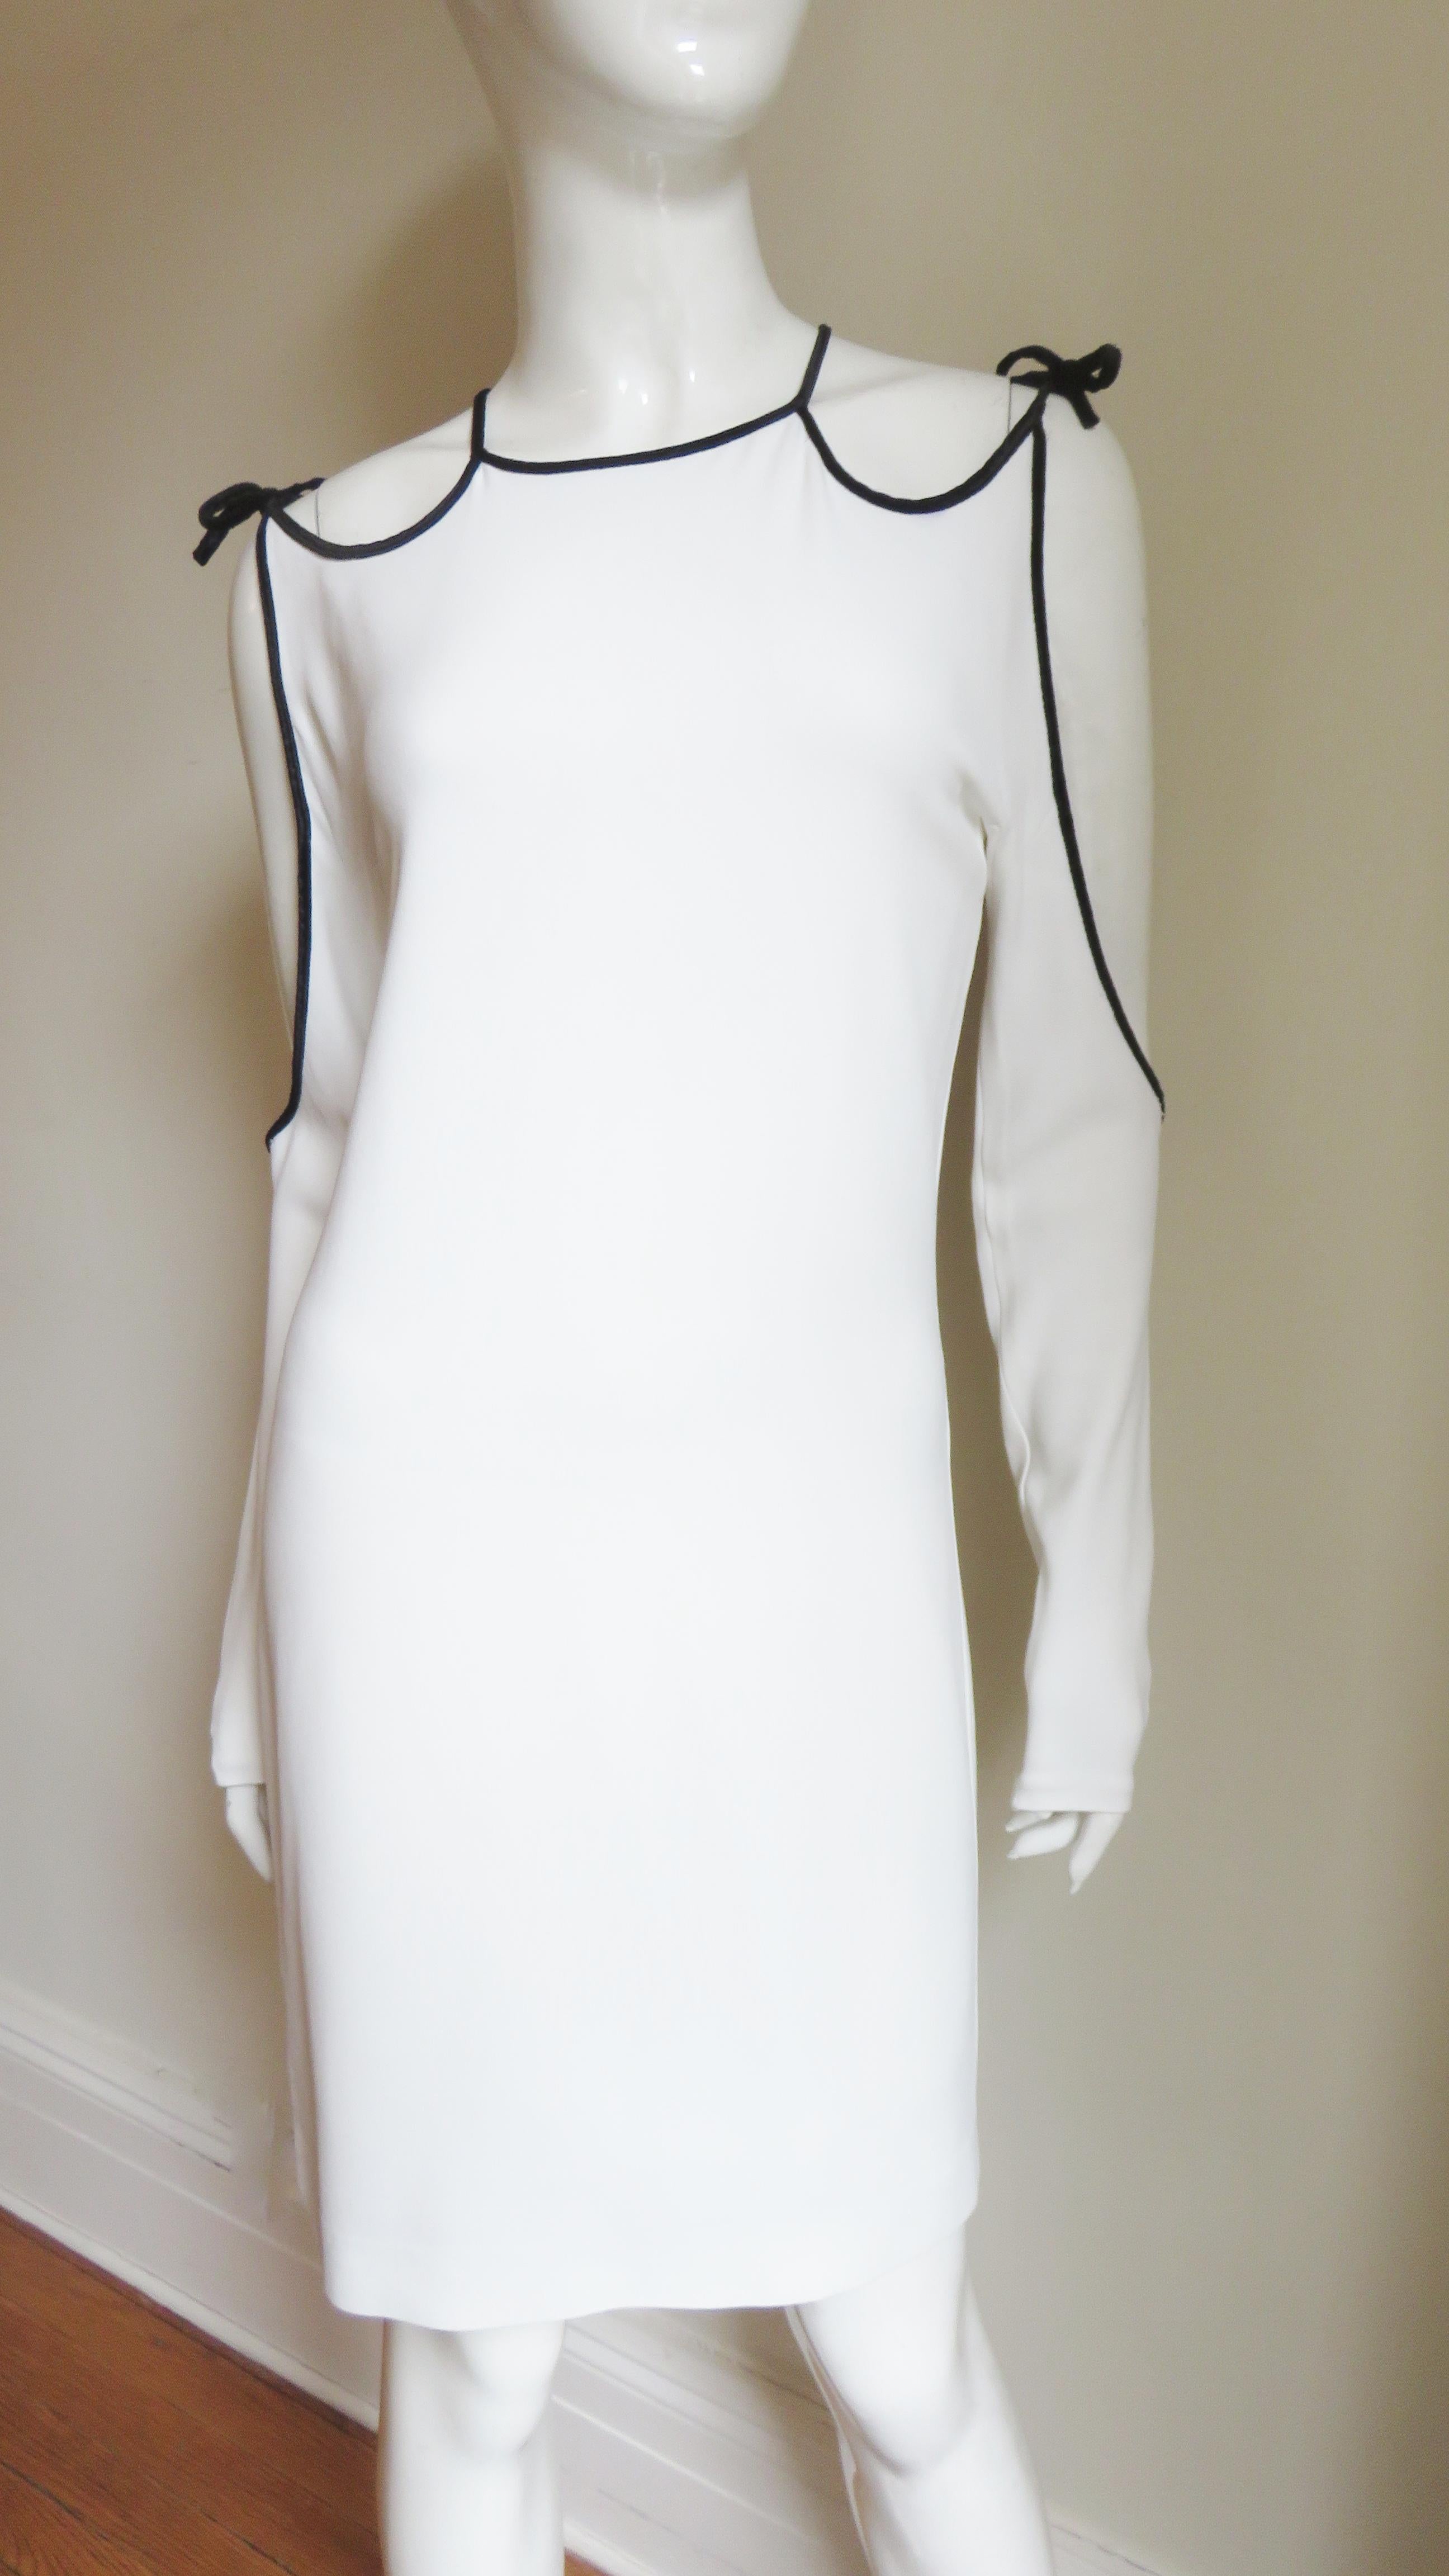 A fabulous white jersey dress from Tom Ford.  It has cut out shoulders, sleeves and back all outlined in black velvet piping which ties at the shoulders.  The dress is semi fitted then falls straight to the hem.  It is unlined, has a hook closing at